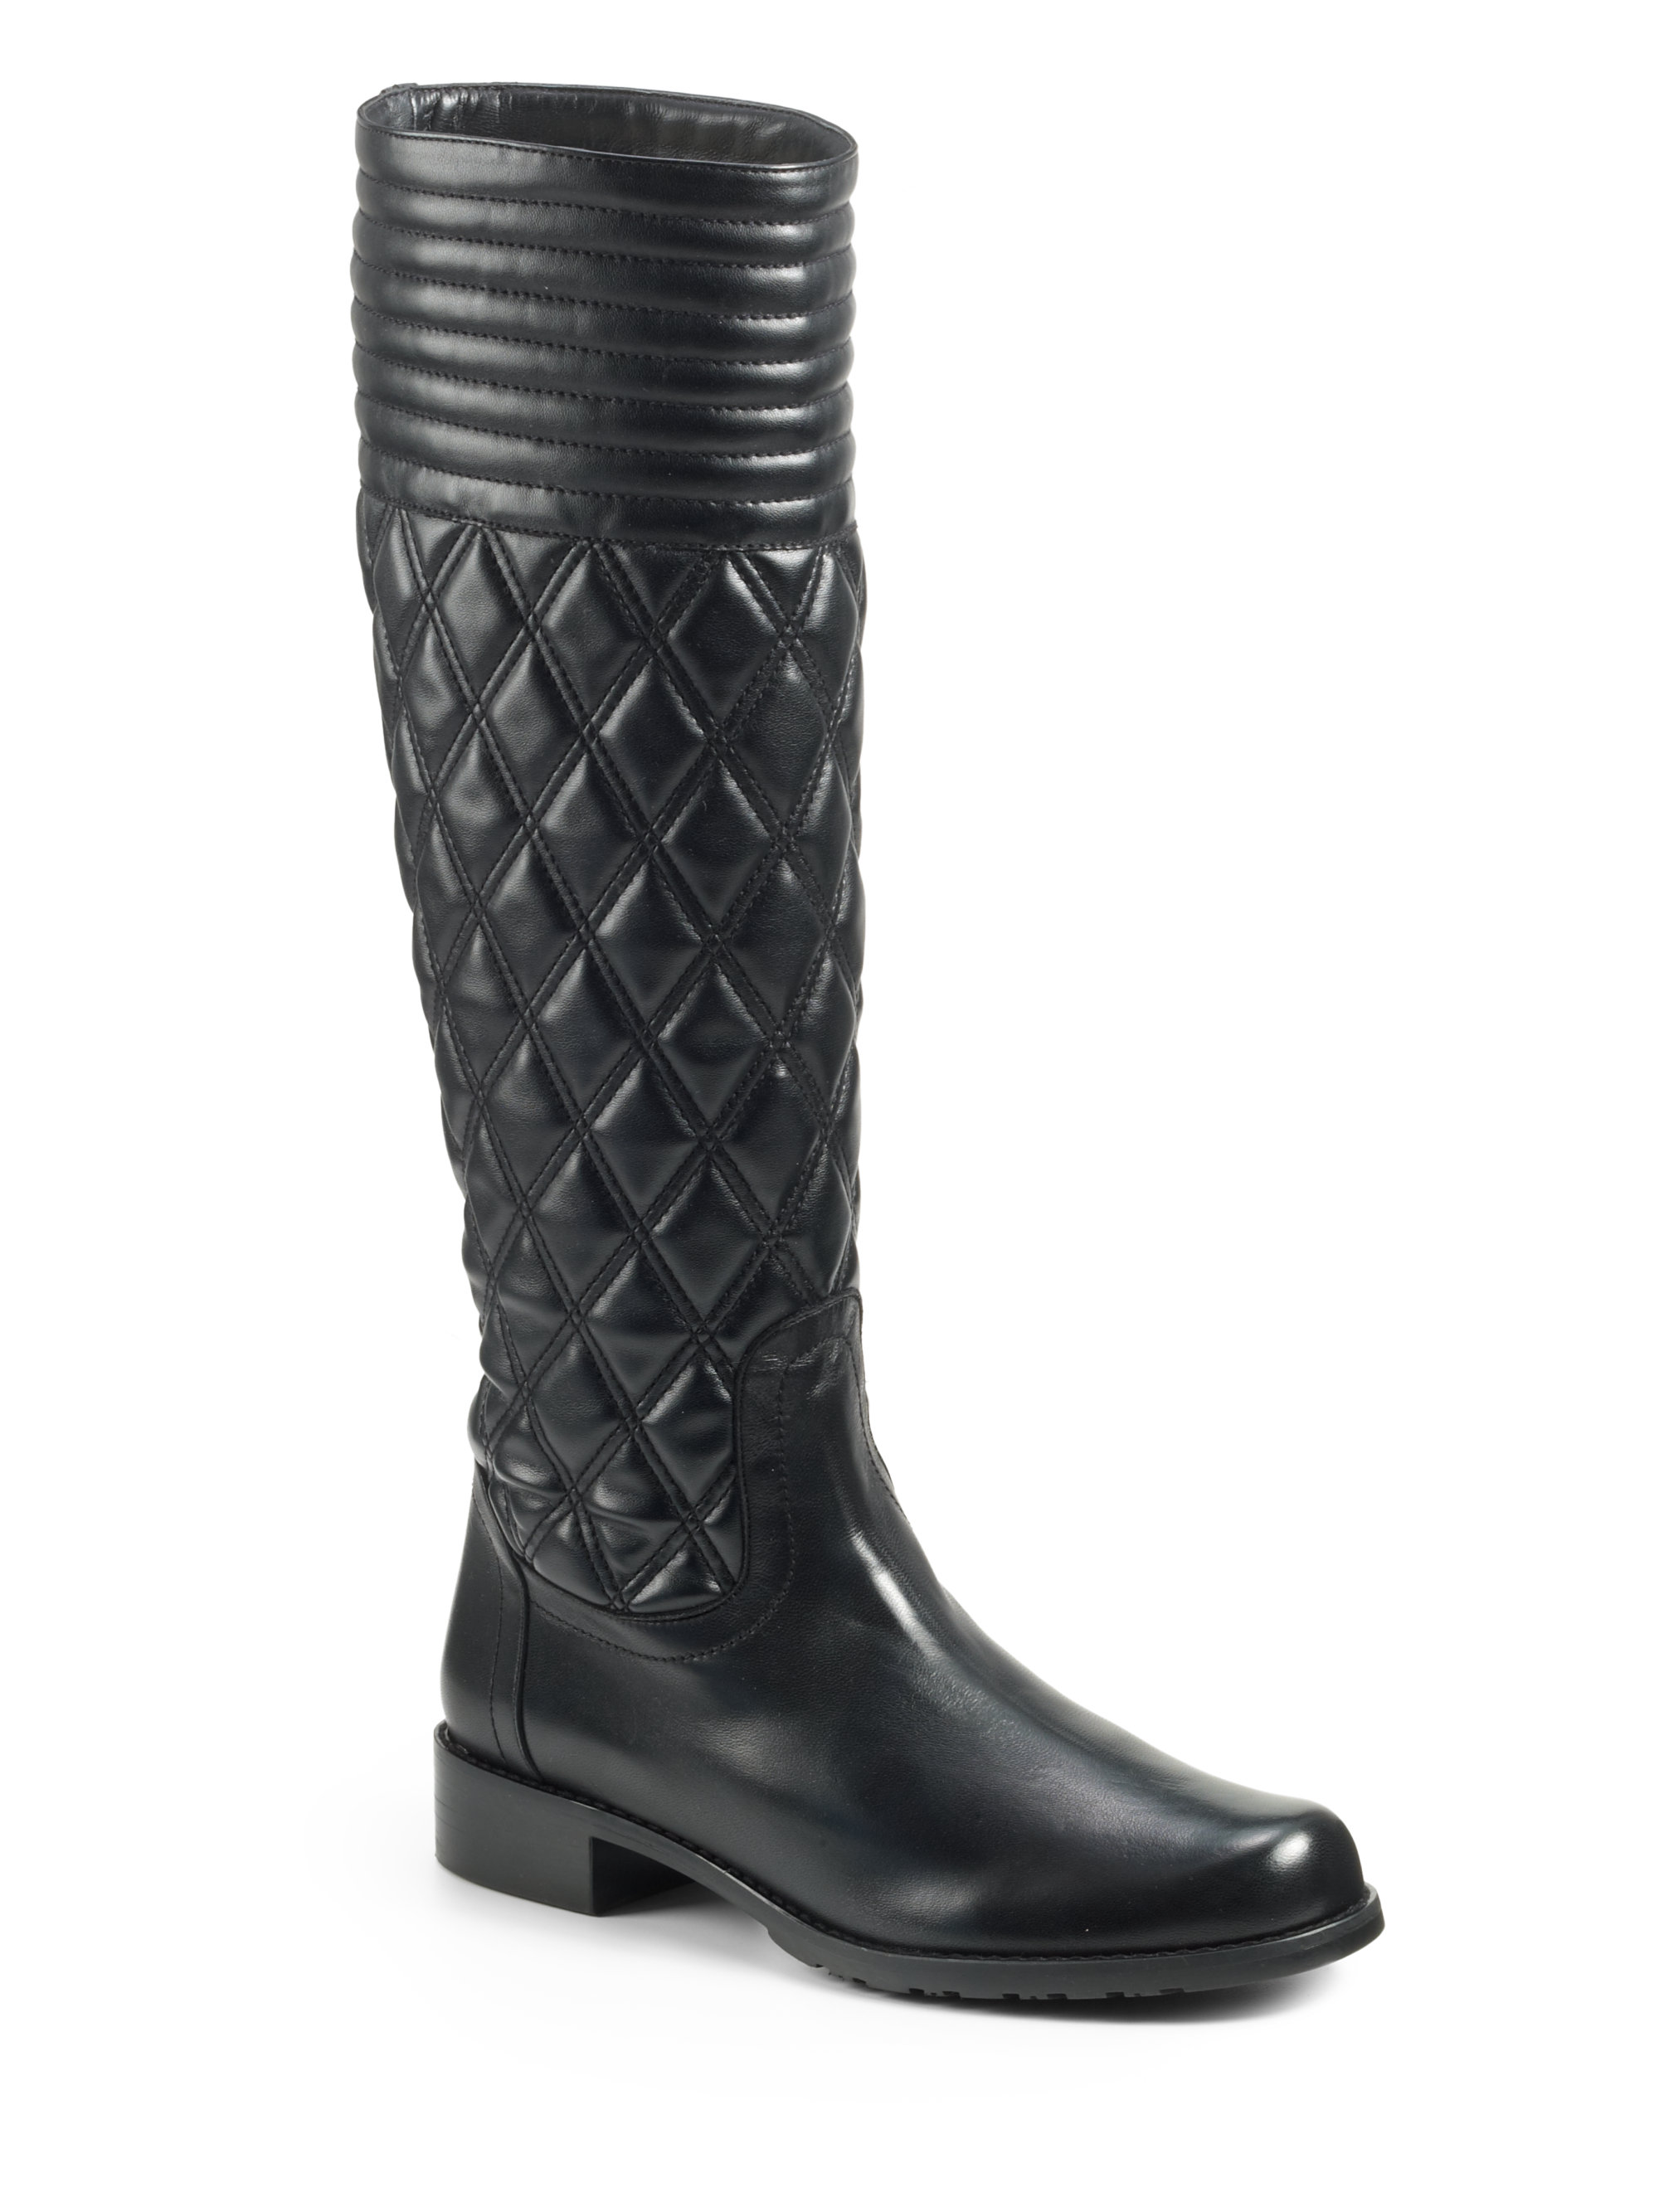 Stuart Weitzman Clute Quilted Leather 